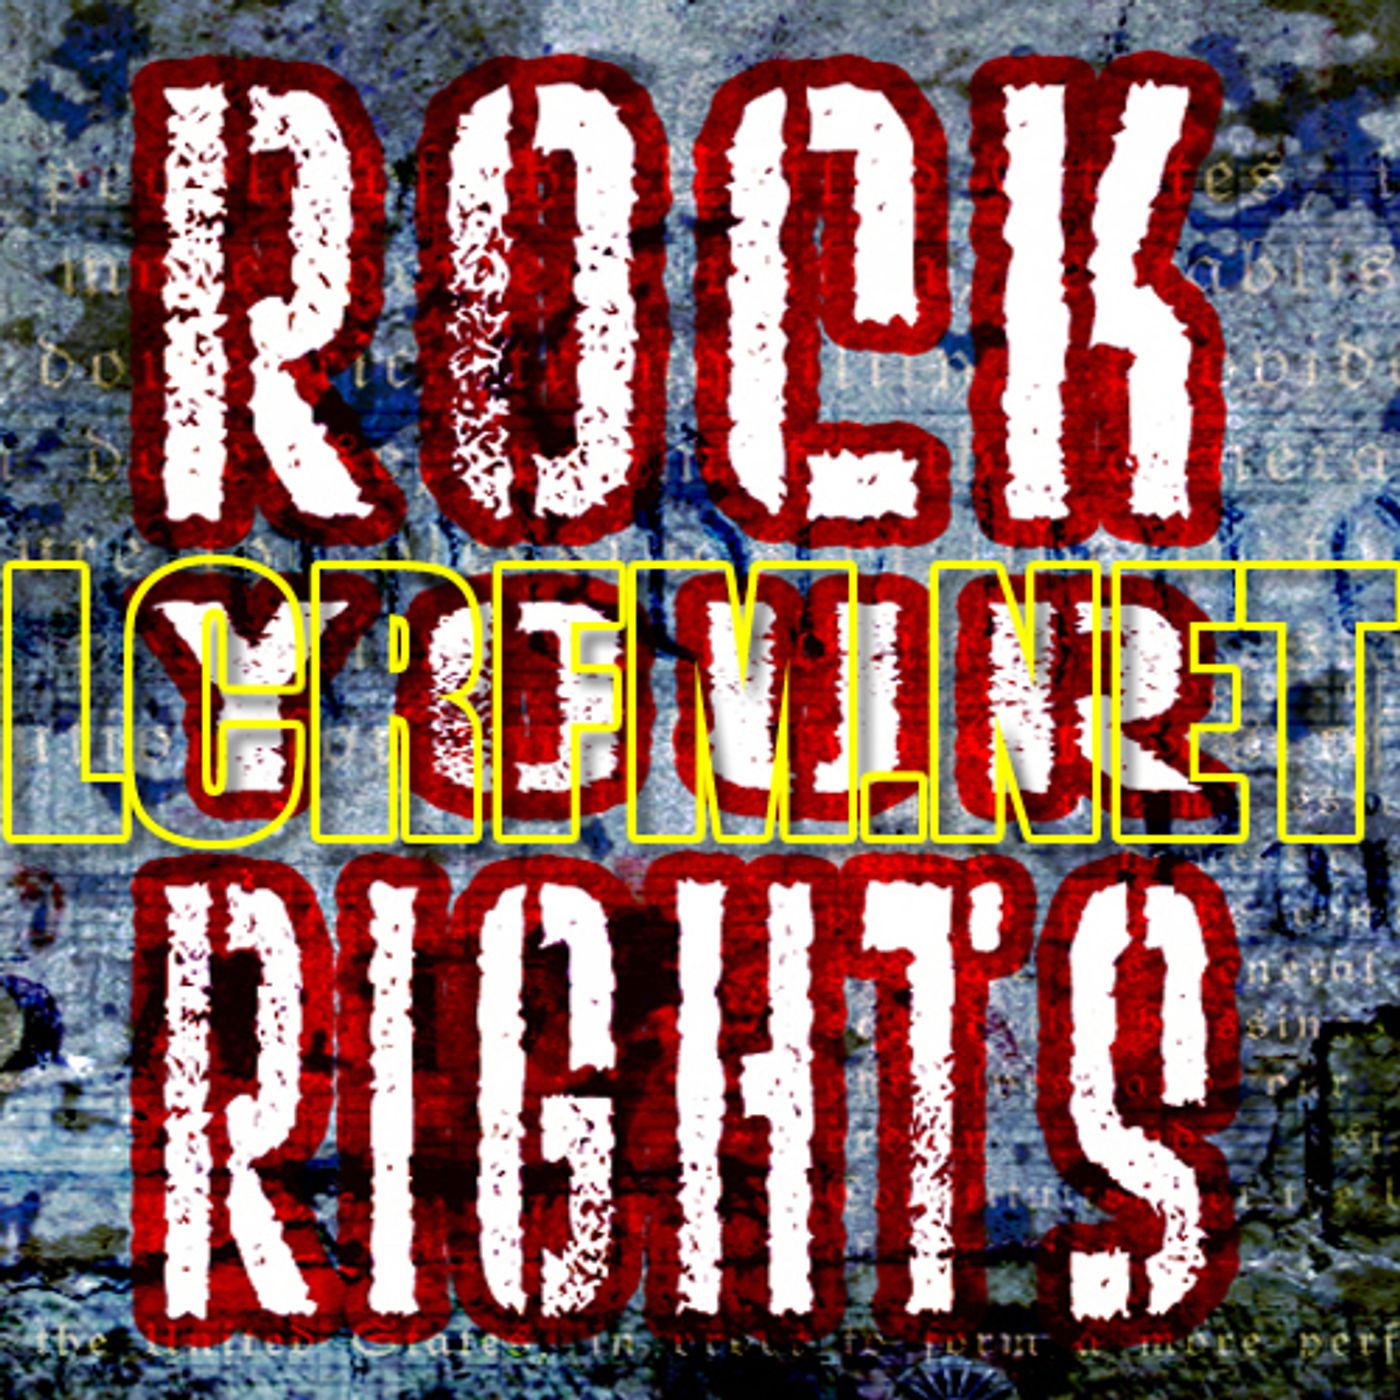 My Top 3 Shows "ROCK YOUR RIGHTS"  LONDON CALLING #itsandros